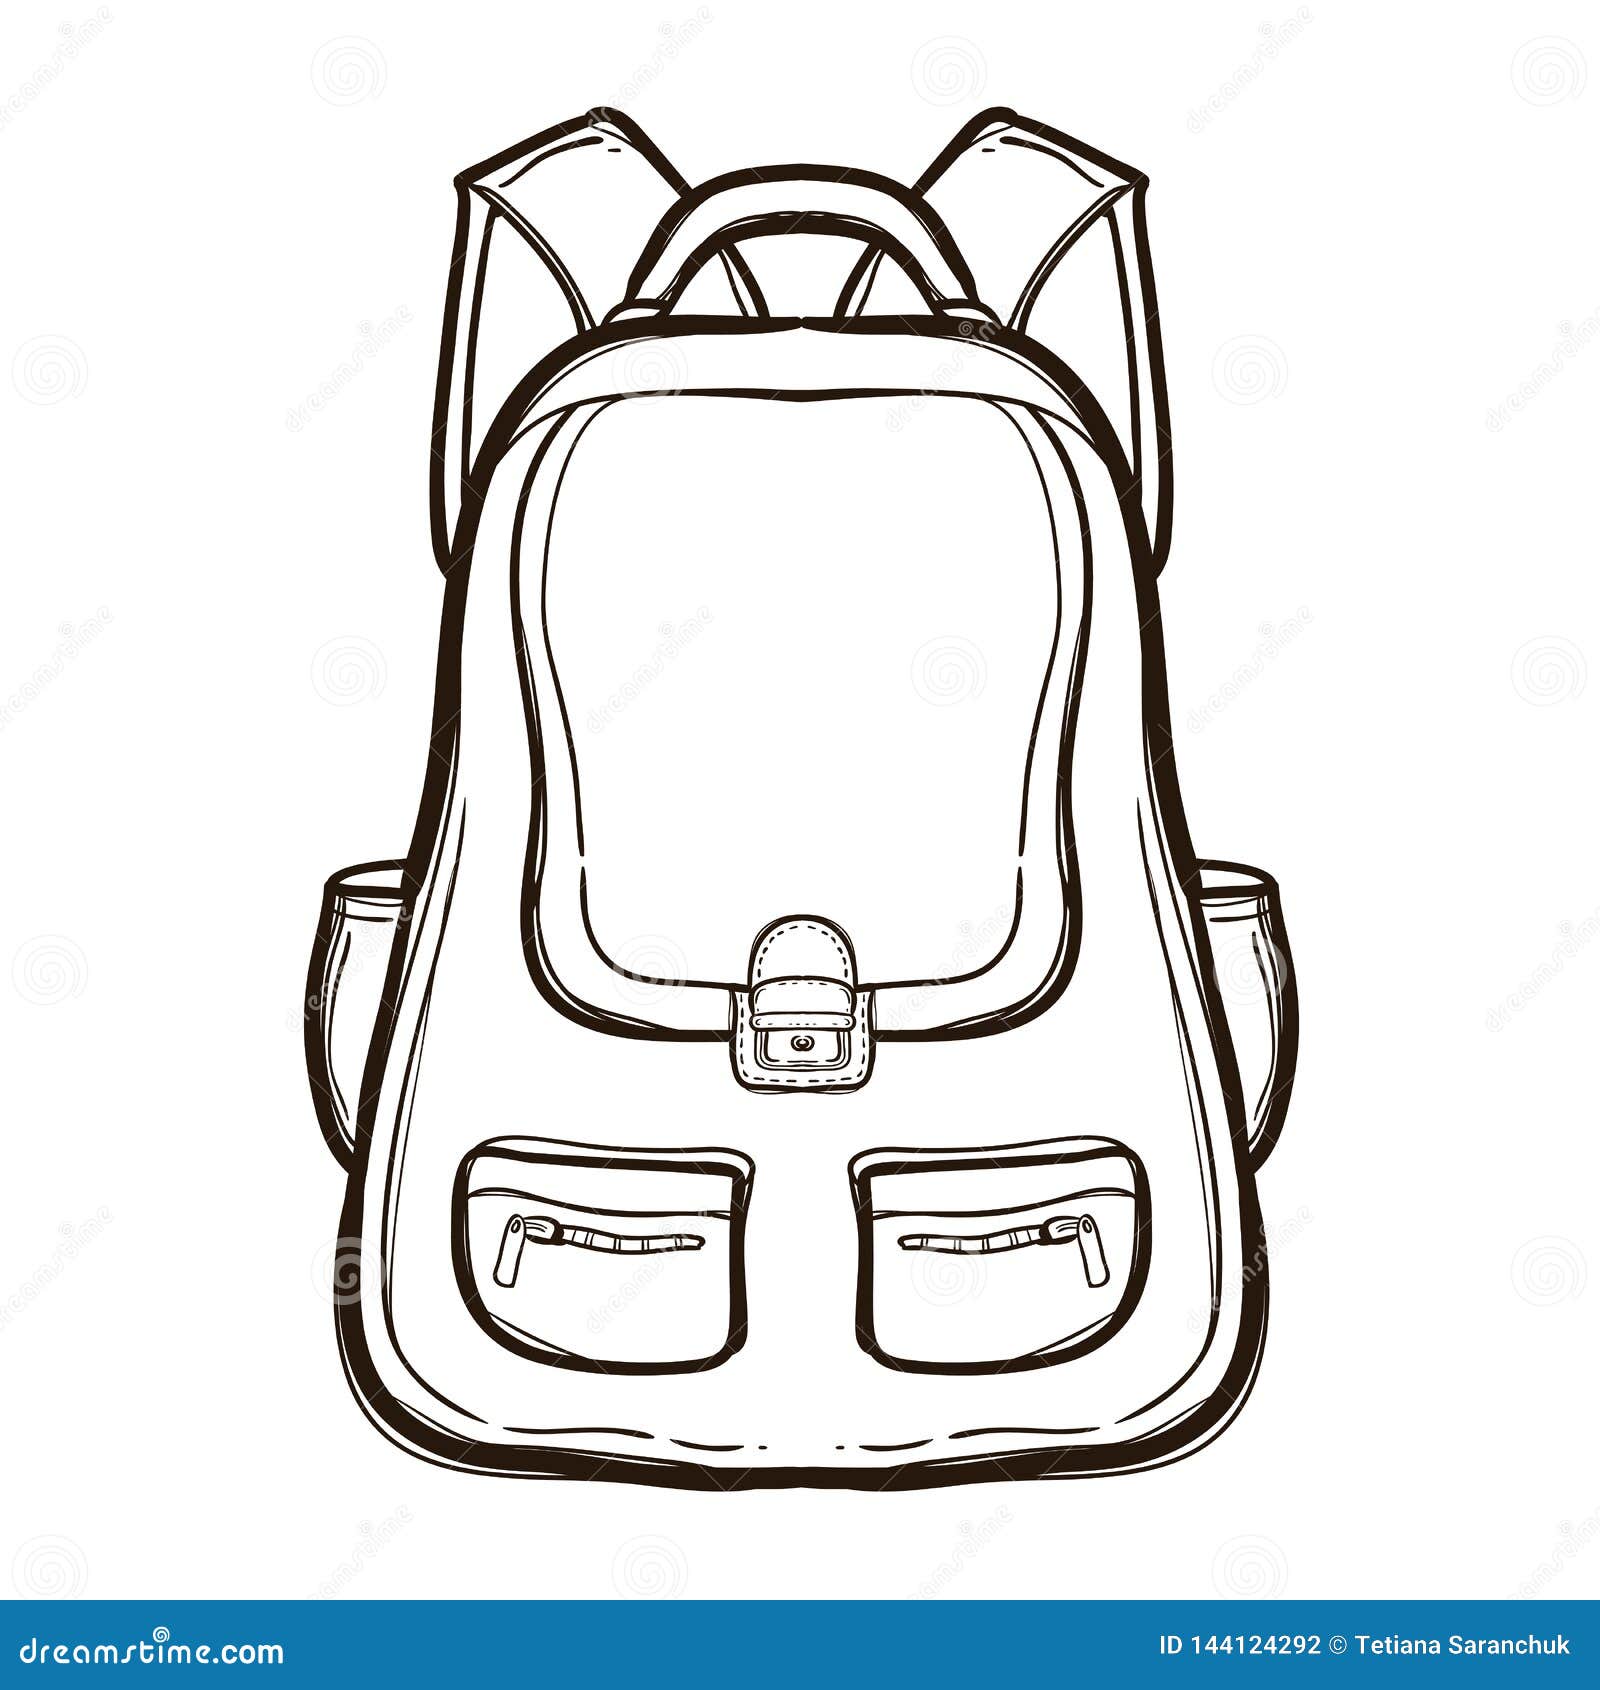 Backpack Coloring Pages Printable for Free Download